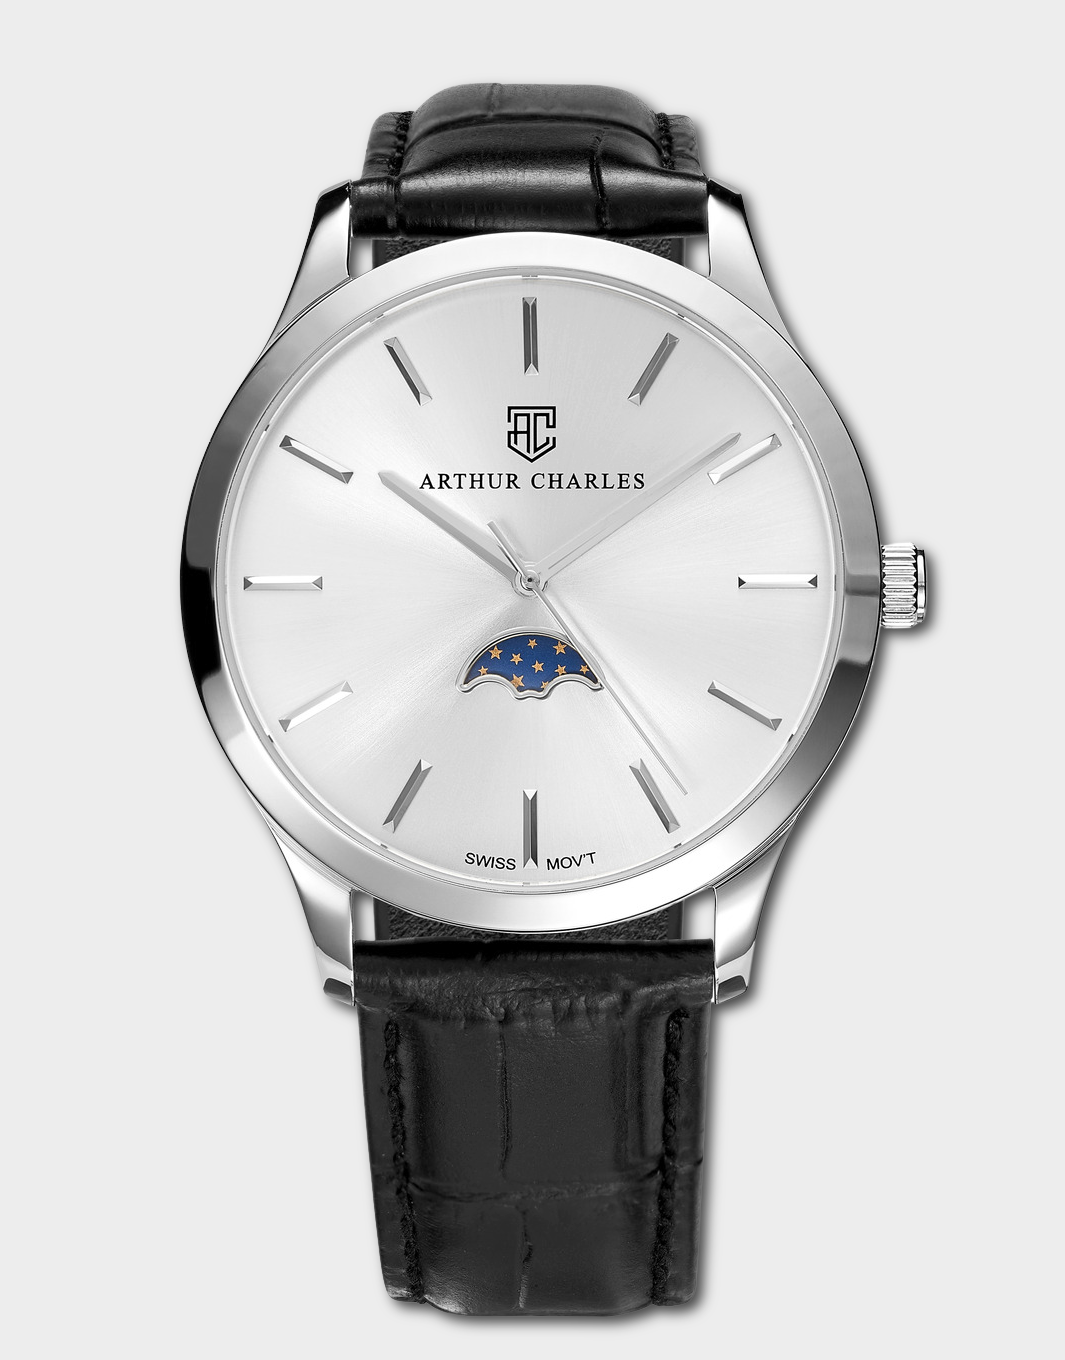 Front view of the Silver Moonphase Watch sold by Arthur Charles Watches. This watch has a black leather butterfly clasp strap and silver dial with silver hands and indices. This watch features a moonphase indicator and also uses swiss movement.